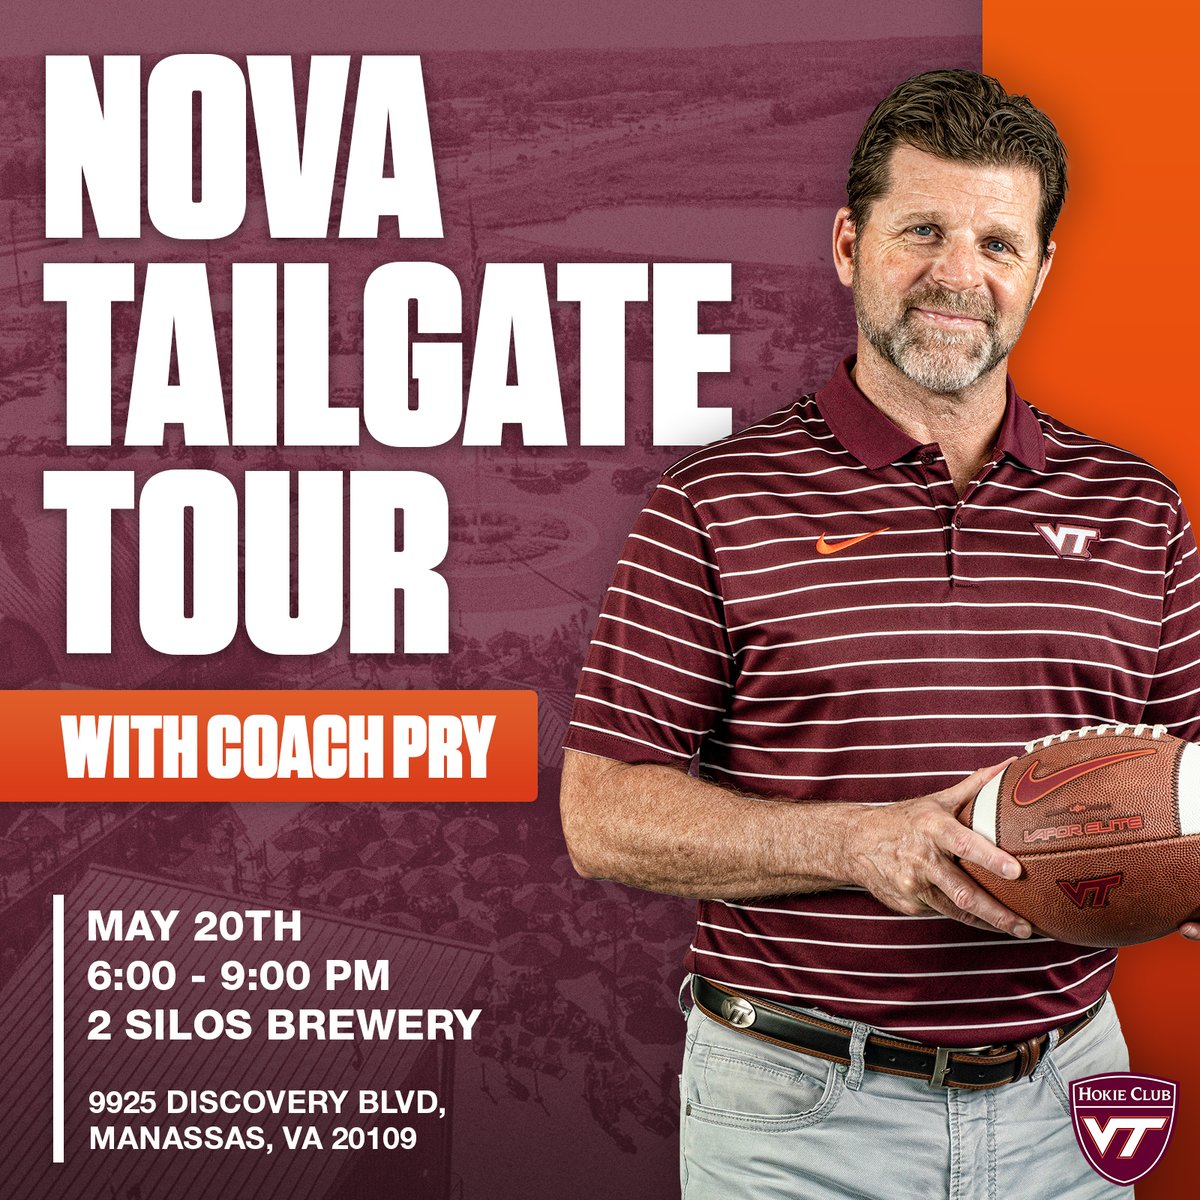 𝐂𝐚𝐥𝐥𝐢𝐧𝐠 𝐚𝐥𝐥 𝐍𝐎𝐕𝐀 𝐇𝐨𝐤𝐢𝐞𝐬 🗣️ Coach Pry is coming to Northern Virginia on May 20 for the second stop of the Tailgate Tour! Get your tickets now before the price increases on Tuesday, May 14. REGISTER: vthoki.es/R79ZH